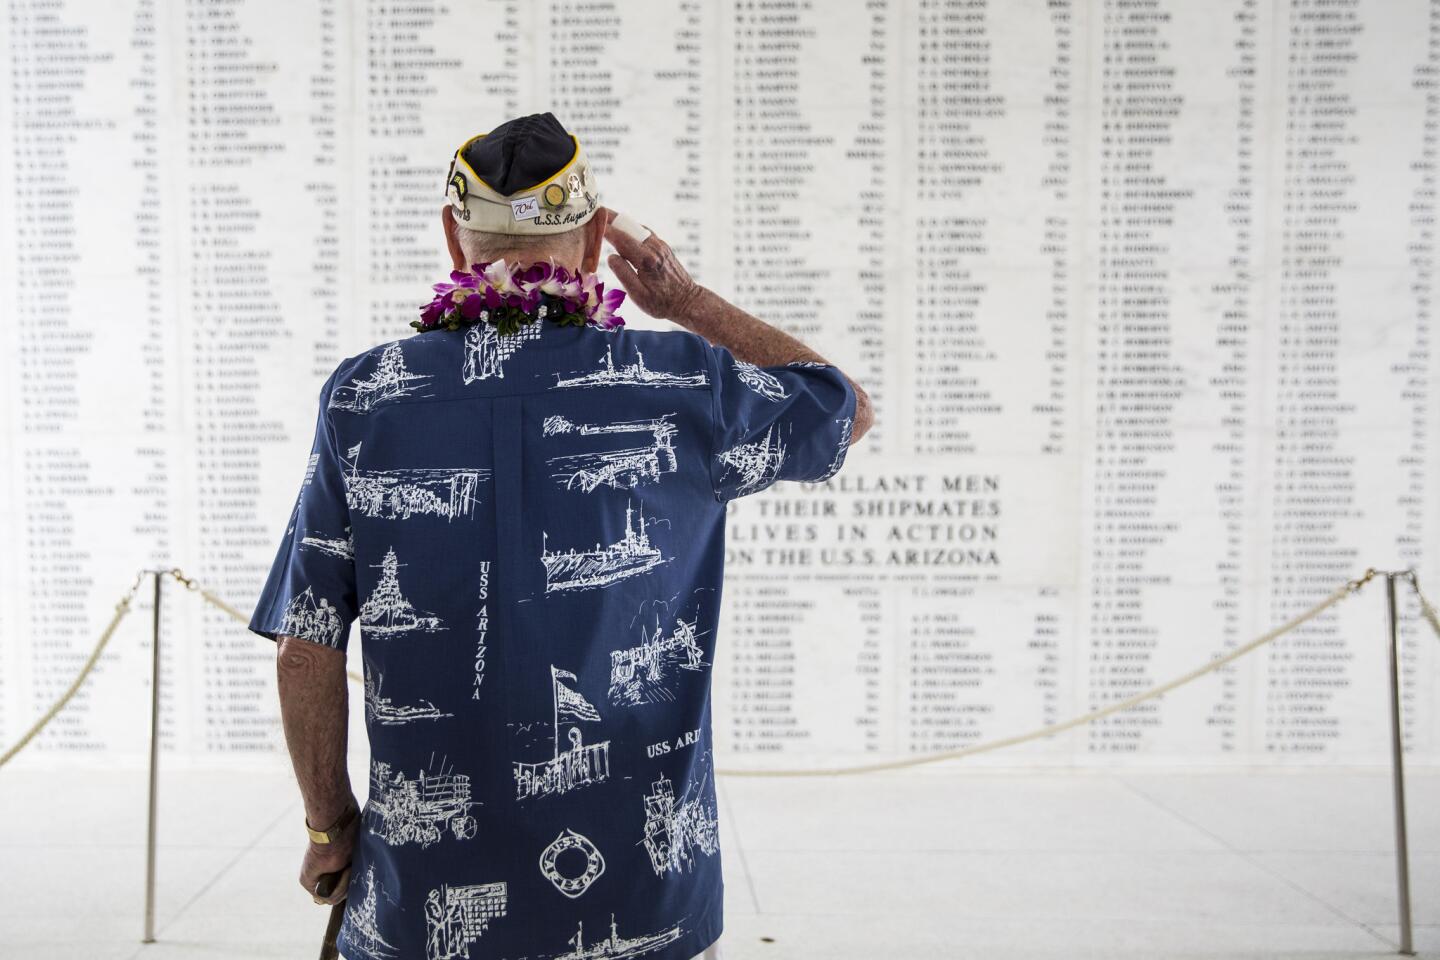 U.S.S. Arizona survivor Lou Conter salutes the Arizona Remembrance Wall during a memorial service marking the 74th Anniversary of the attack on the U.S. naval base at Pearl Harbor Dec. 7, 2015 on the island of Oahu at the Kilo Pier, Joint Base Pearl Harbor-Hickam, in Honolulu, Hawaii. (Photo by Kent Nishimura/Getty Images)